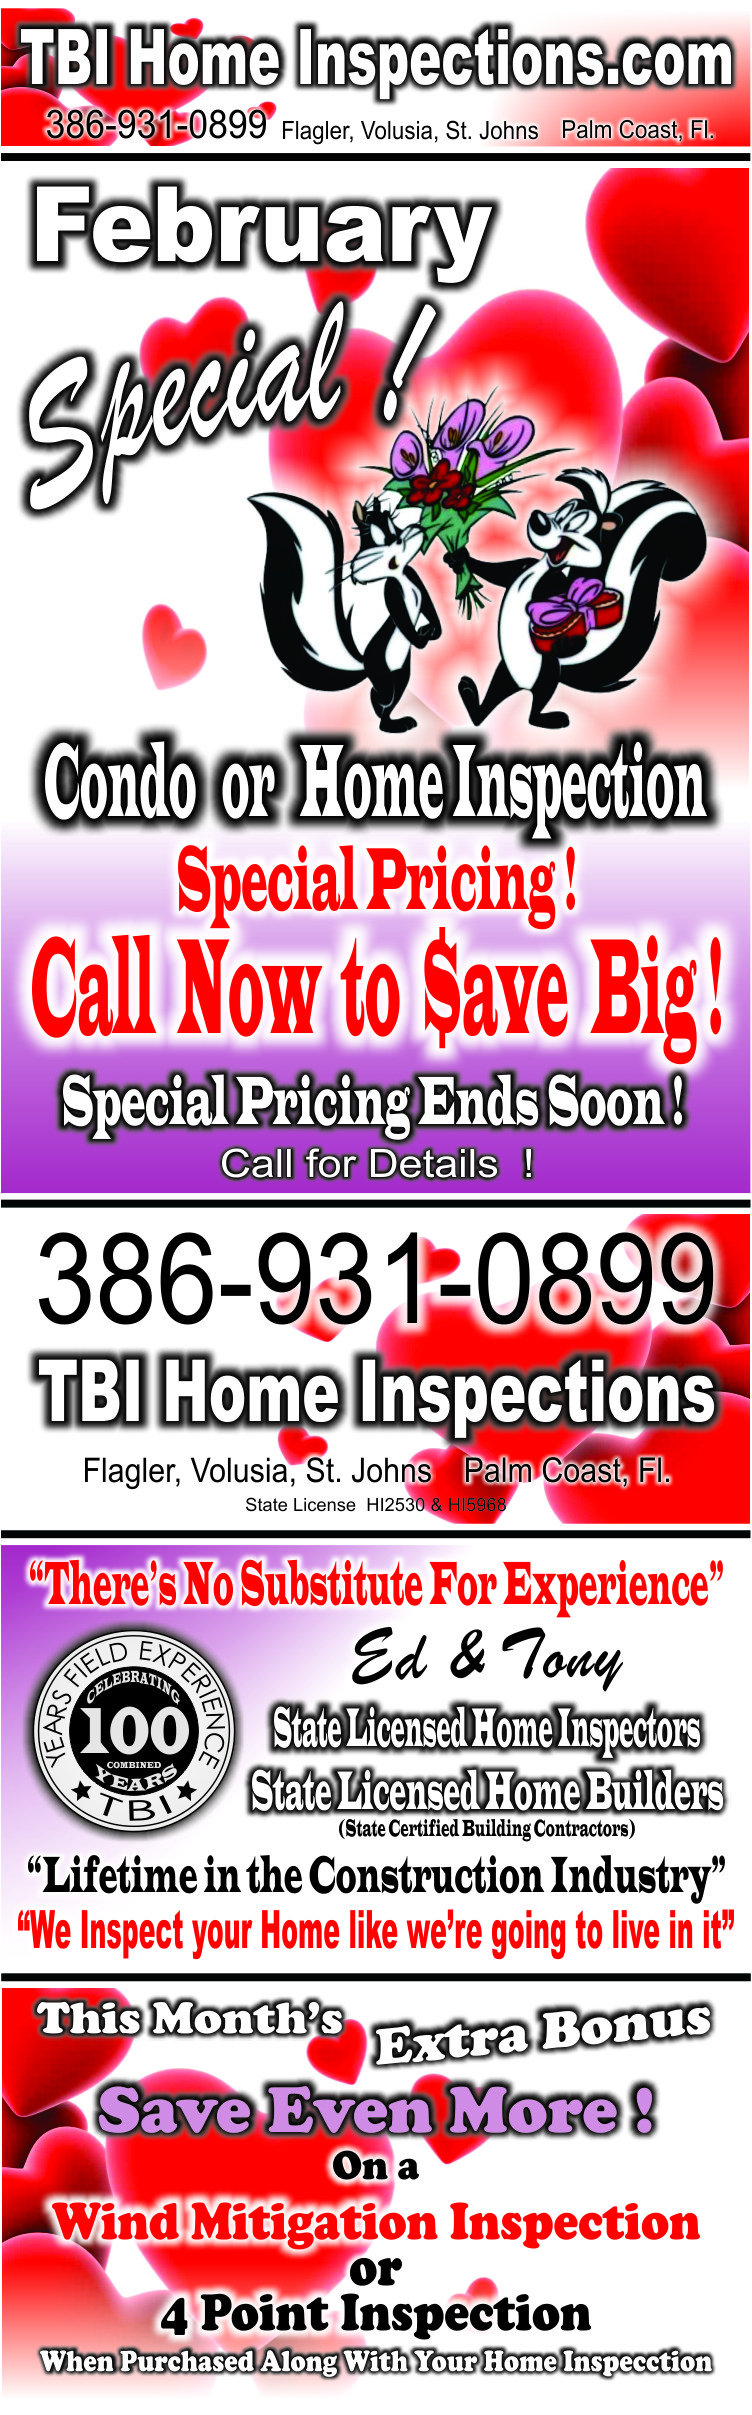 TBI Home Inspections